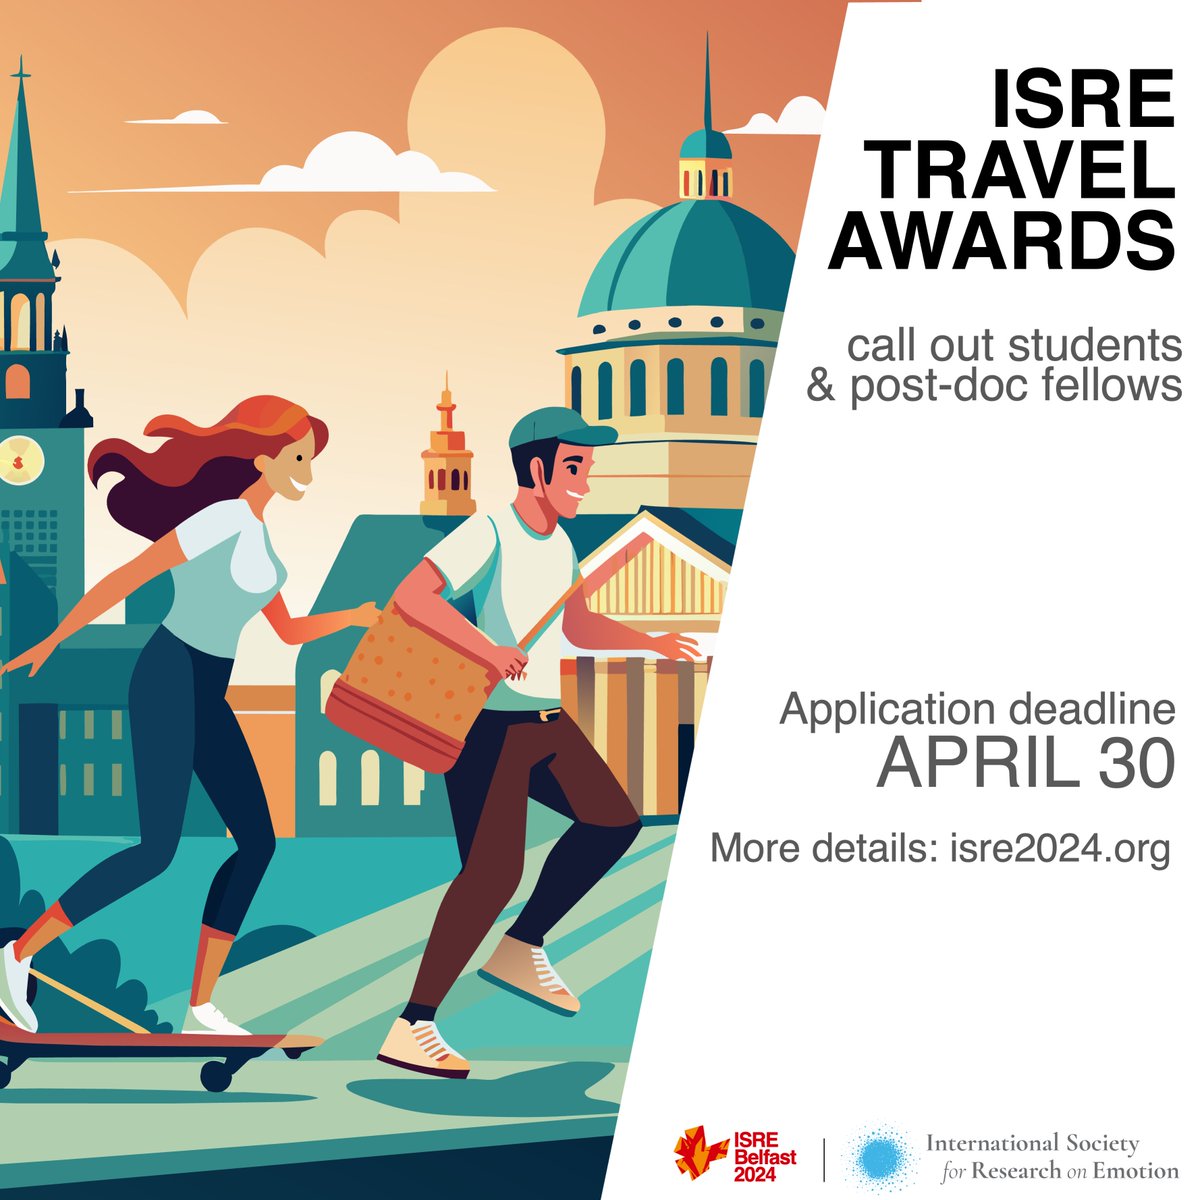 📢 Calling graduate students & postdocs! Here's a chance to ease your travel arrangements to Belfast for #ISRE2024! You're invited to apply for a travel grant. Submit your application before April 30th! Follow the link for full details: isre2024.org/awards.html